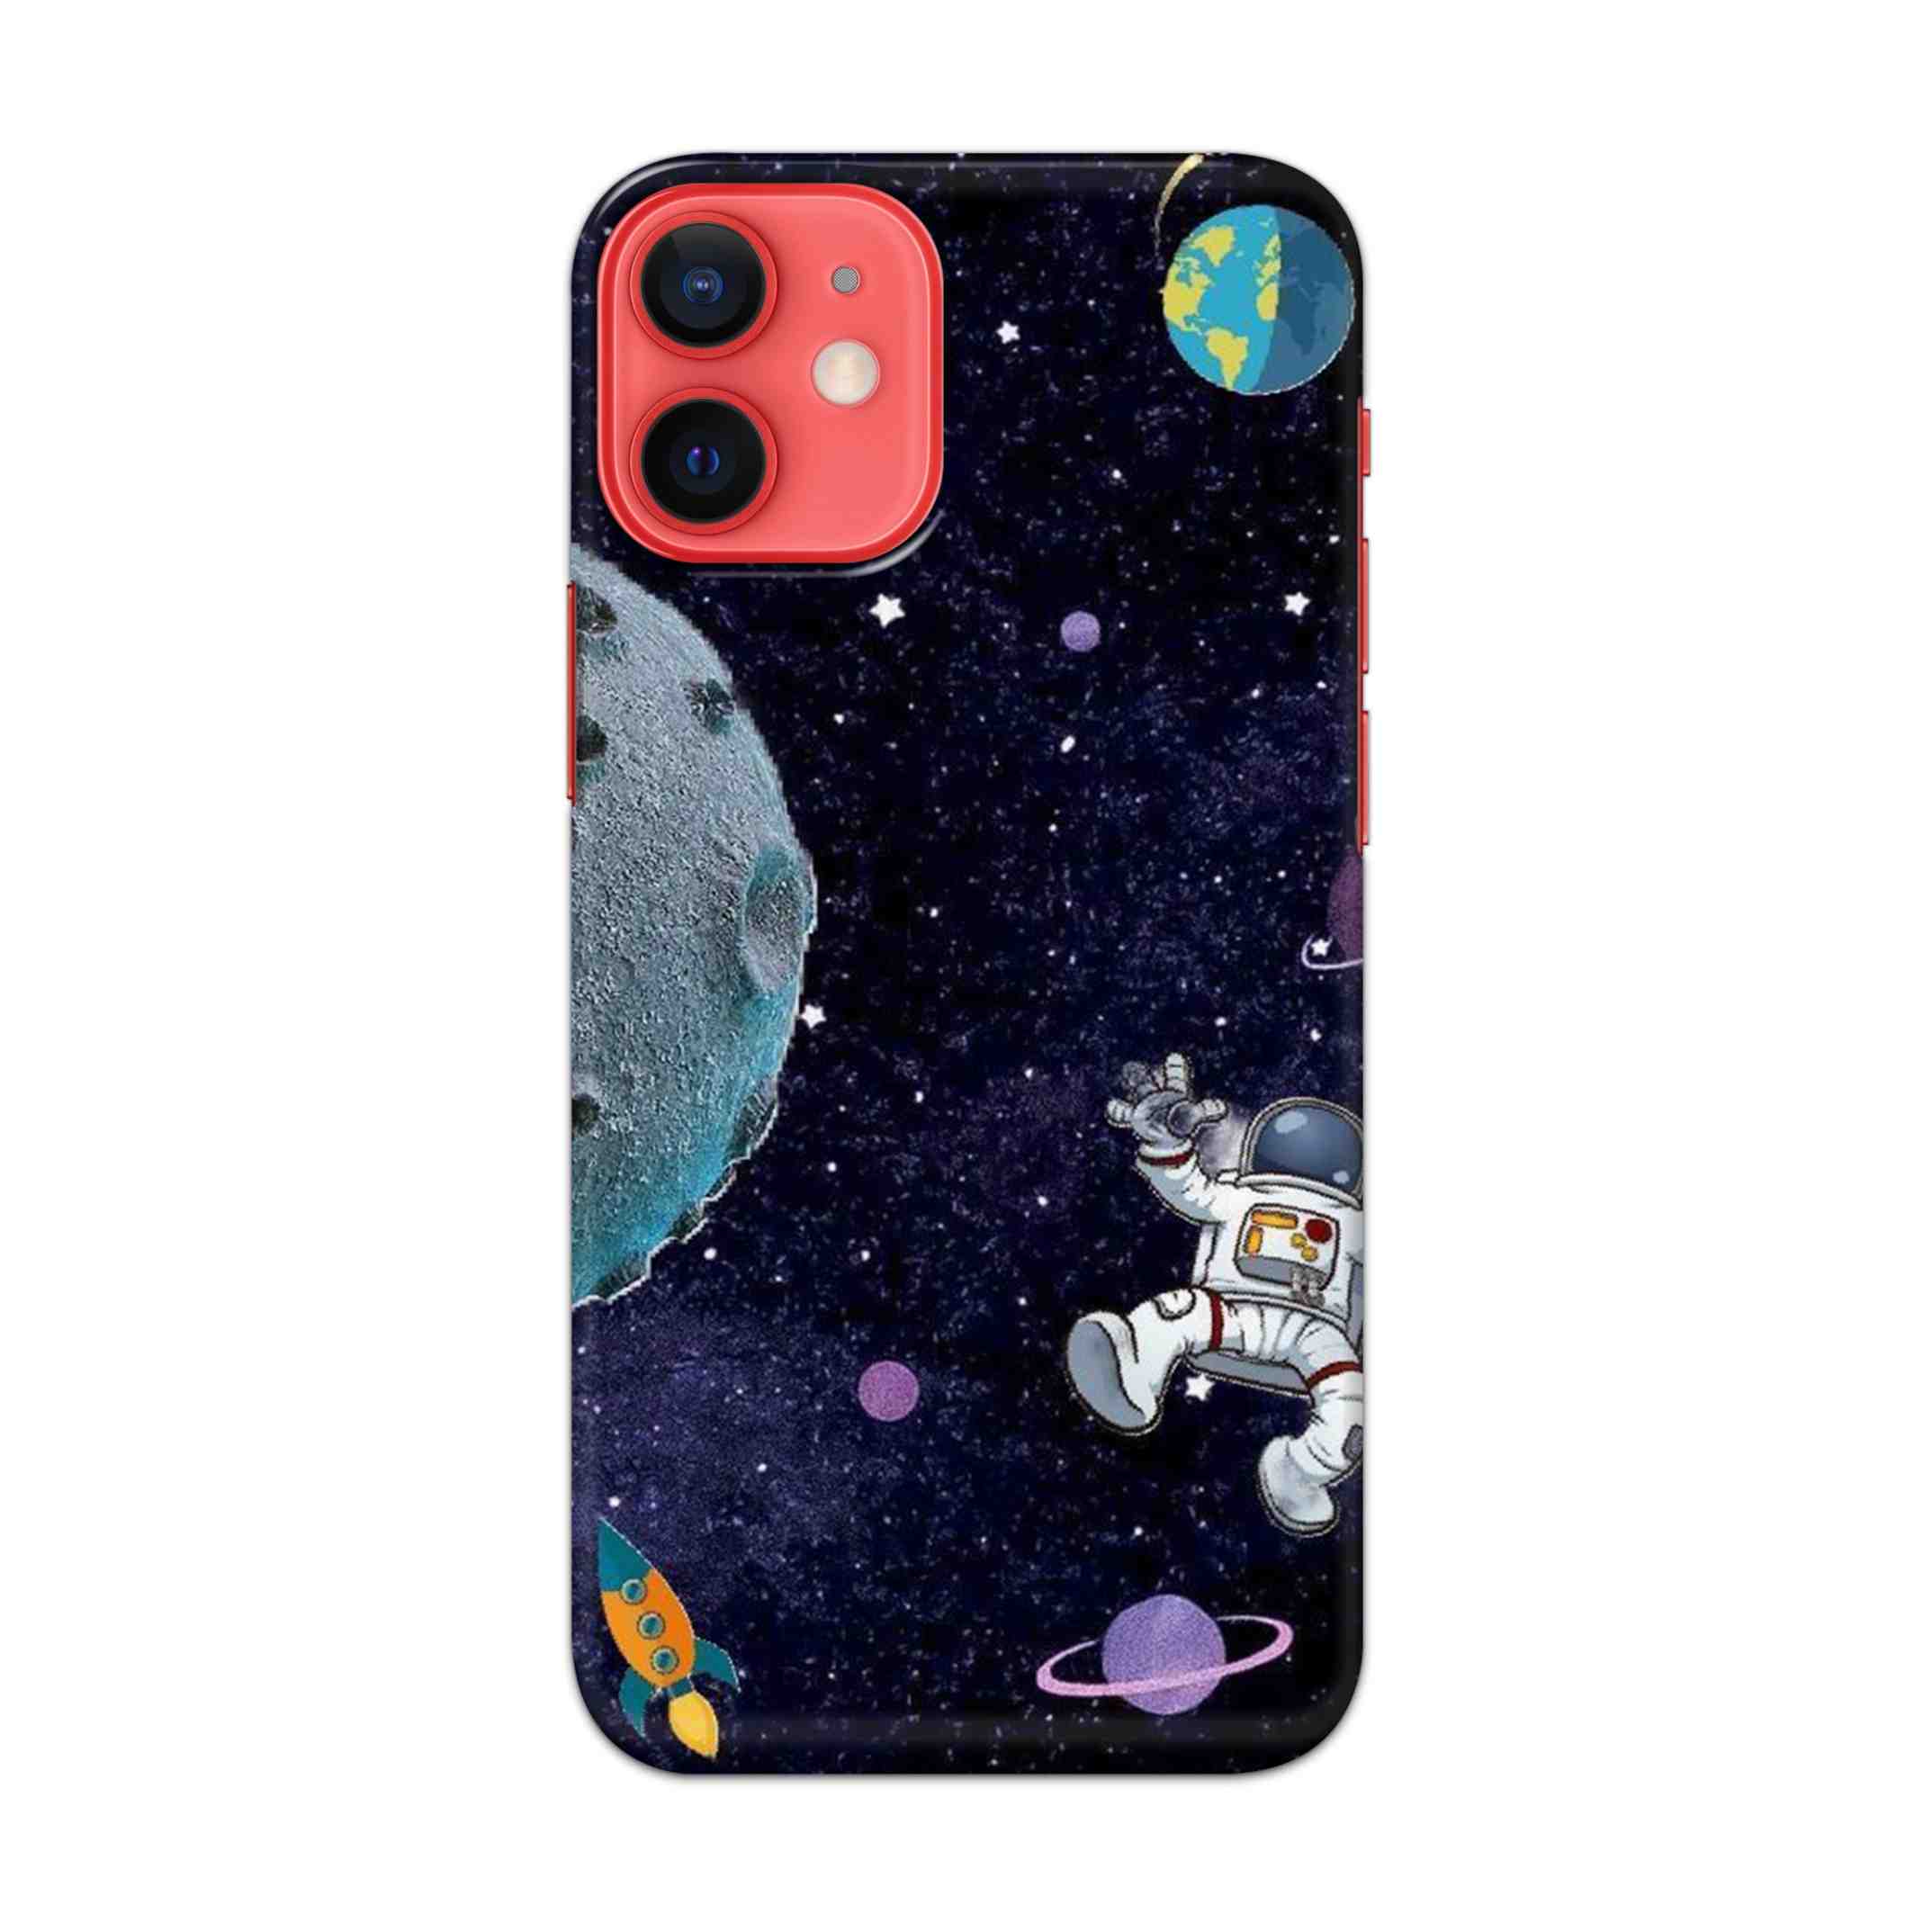 Buy Space Hard Back Mobile Phone Case/Cover For Apple iPhone 12 mini Online